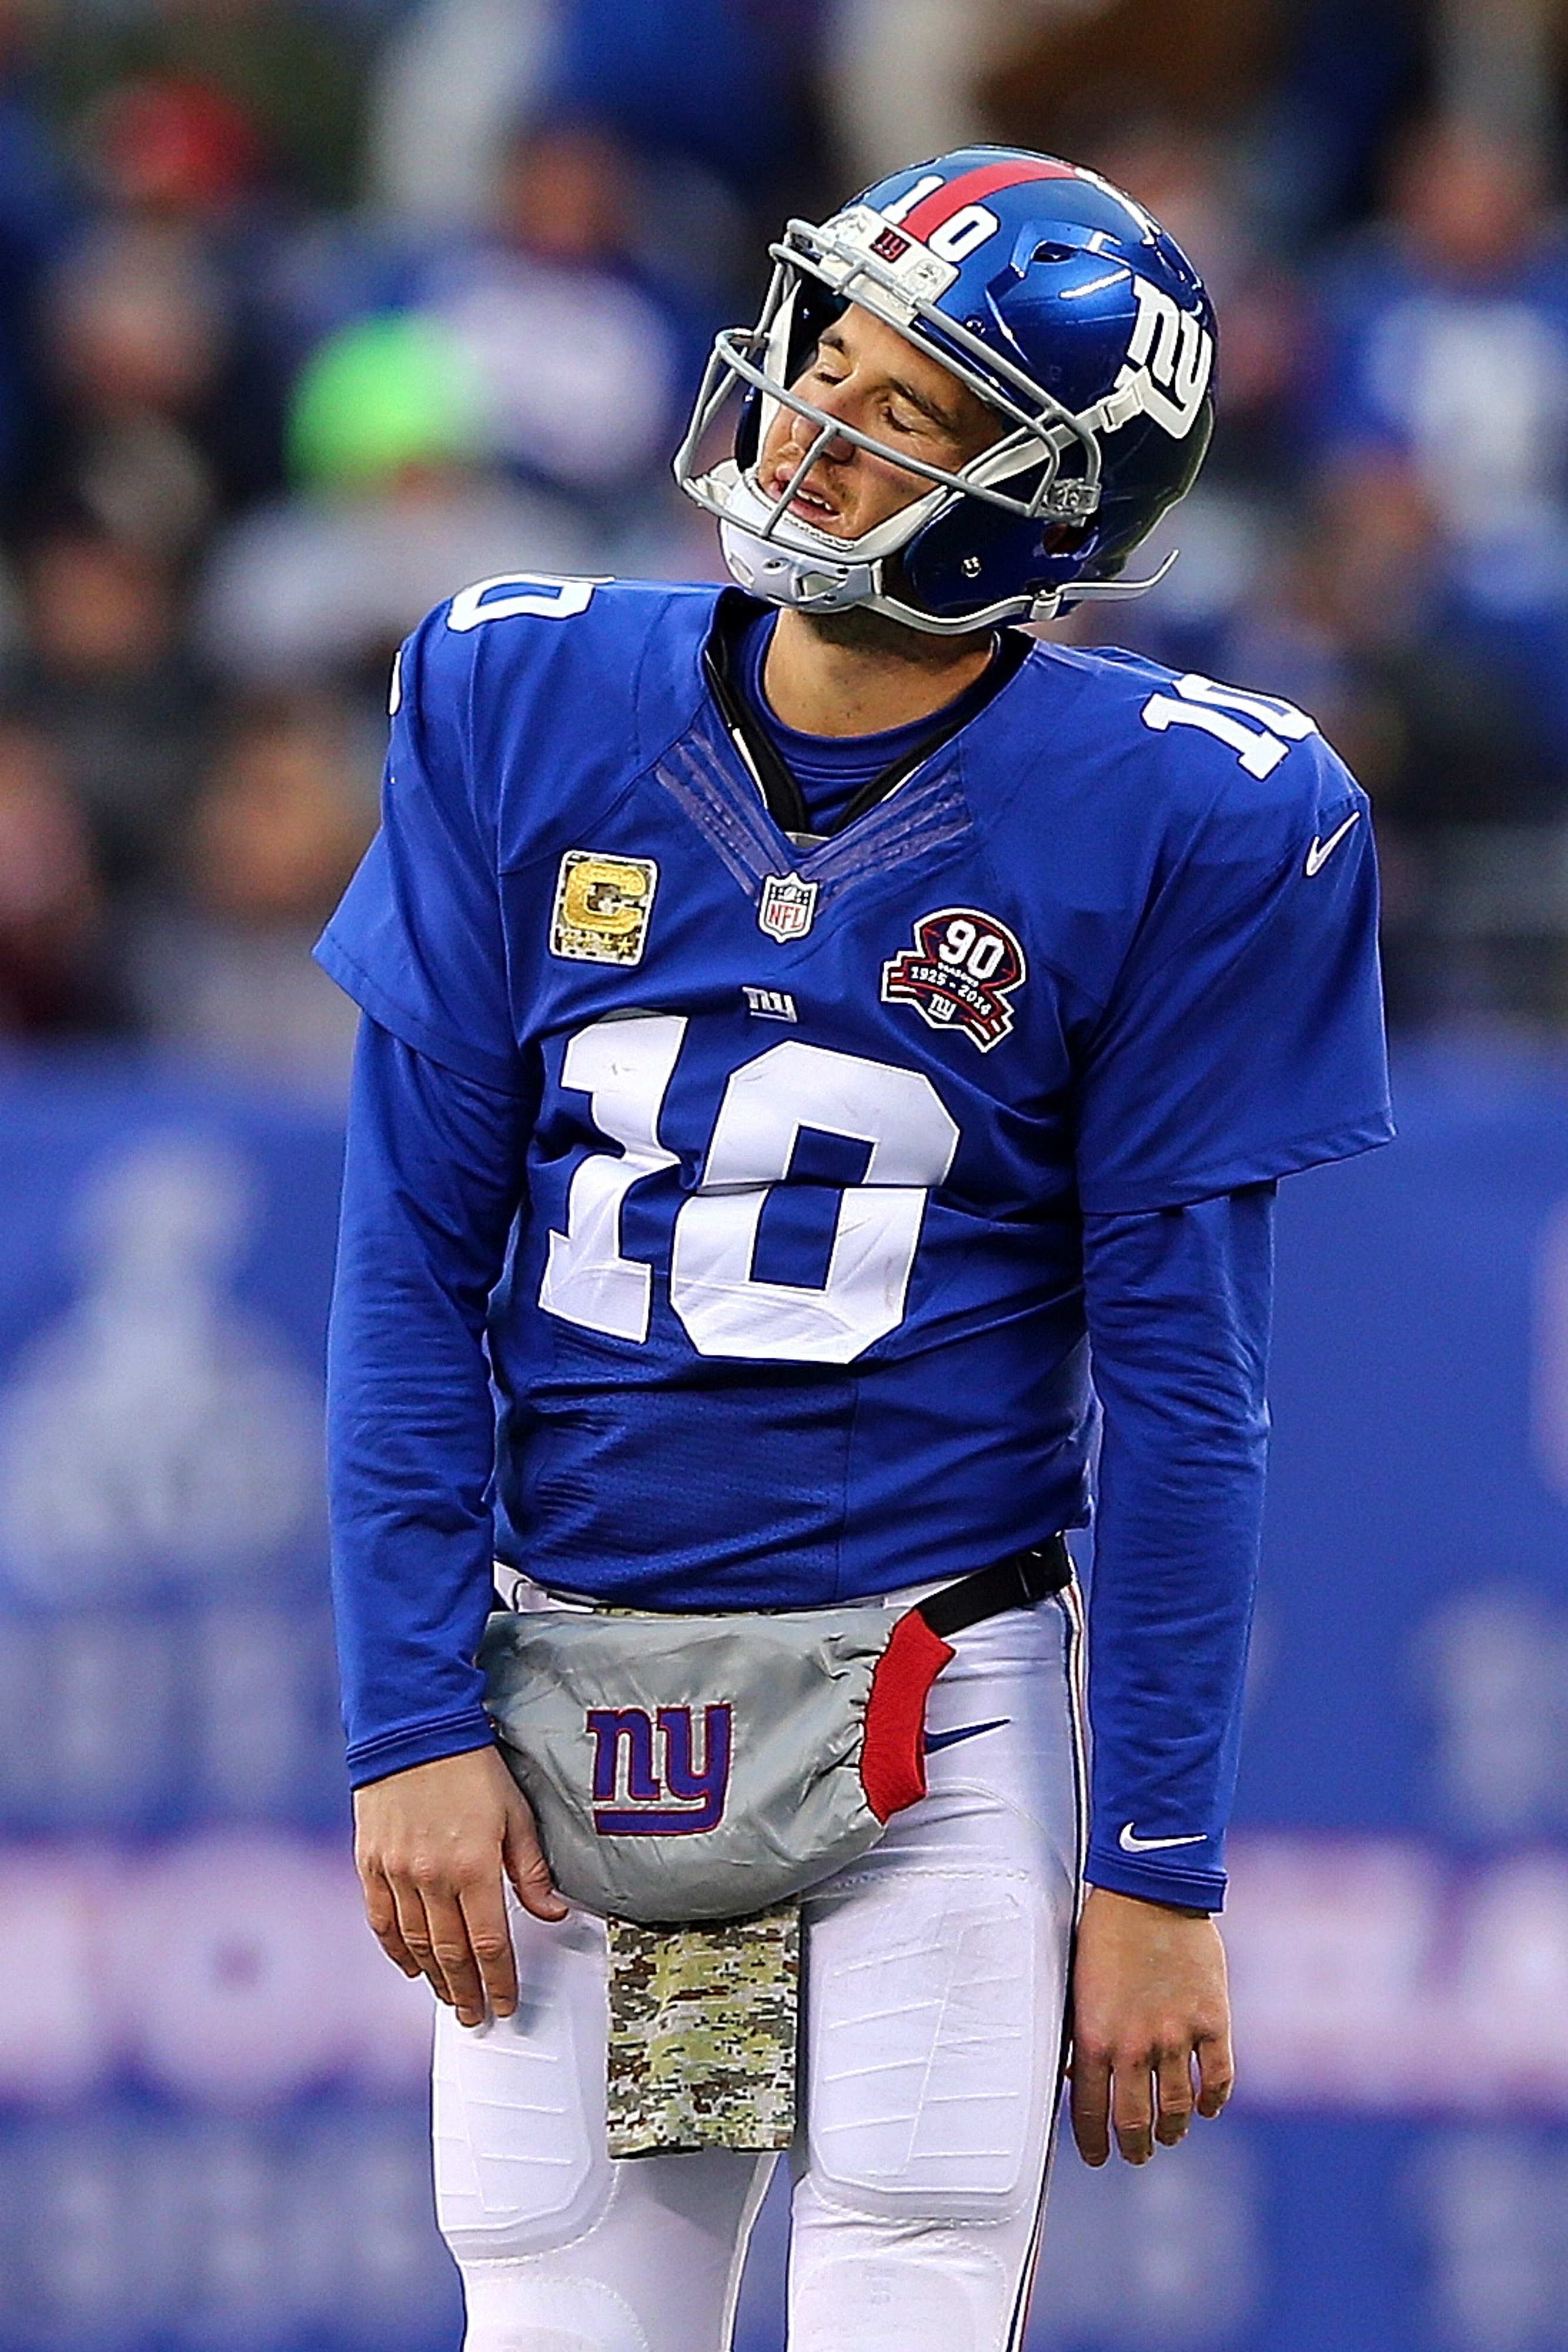 Eli Manning after one of his five interceptions on Sunday